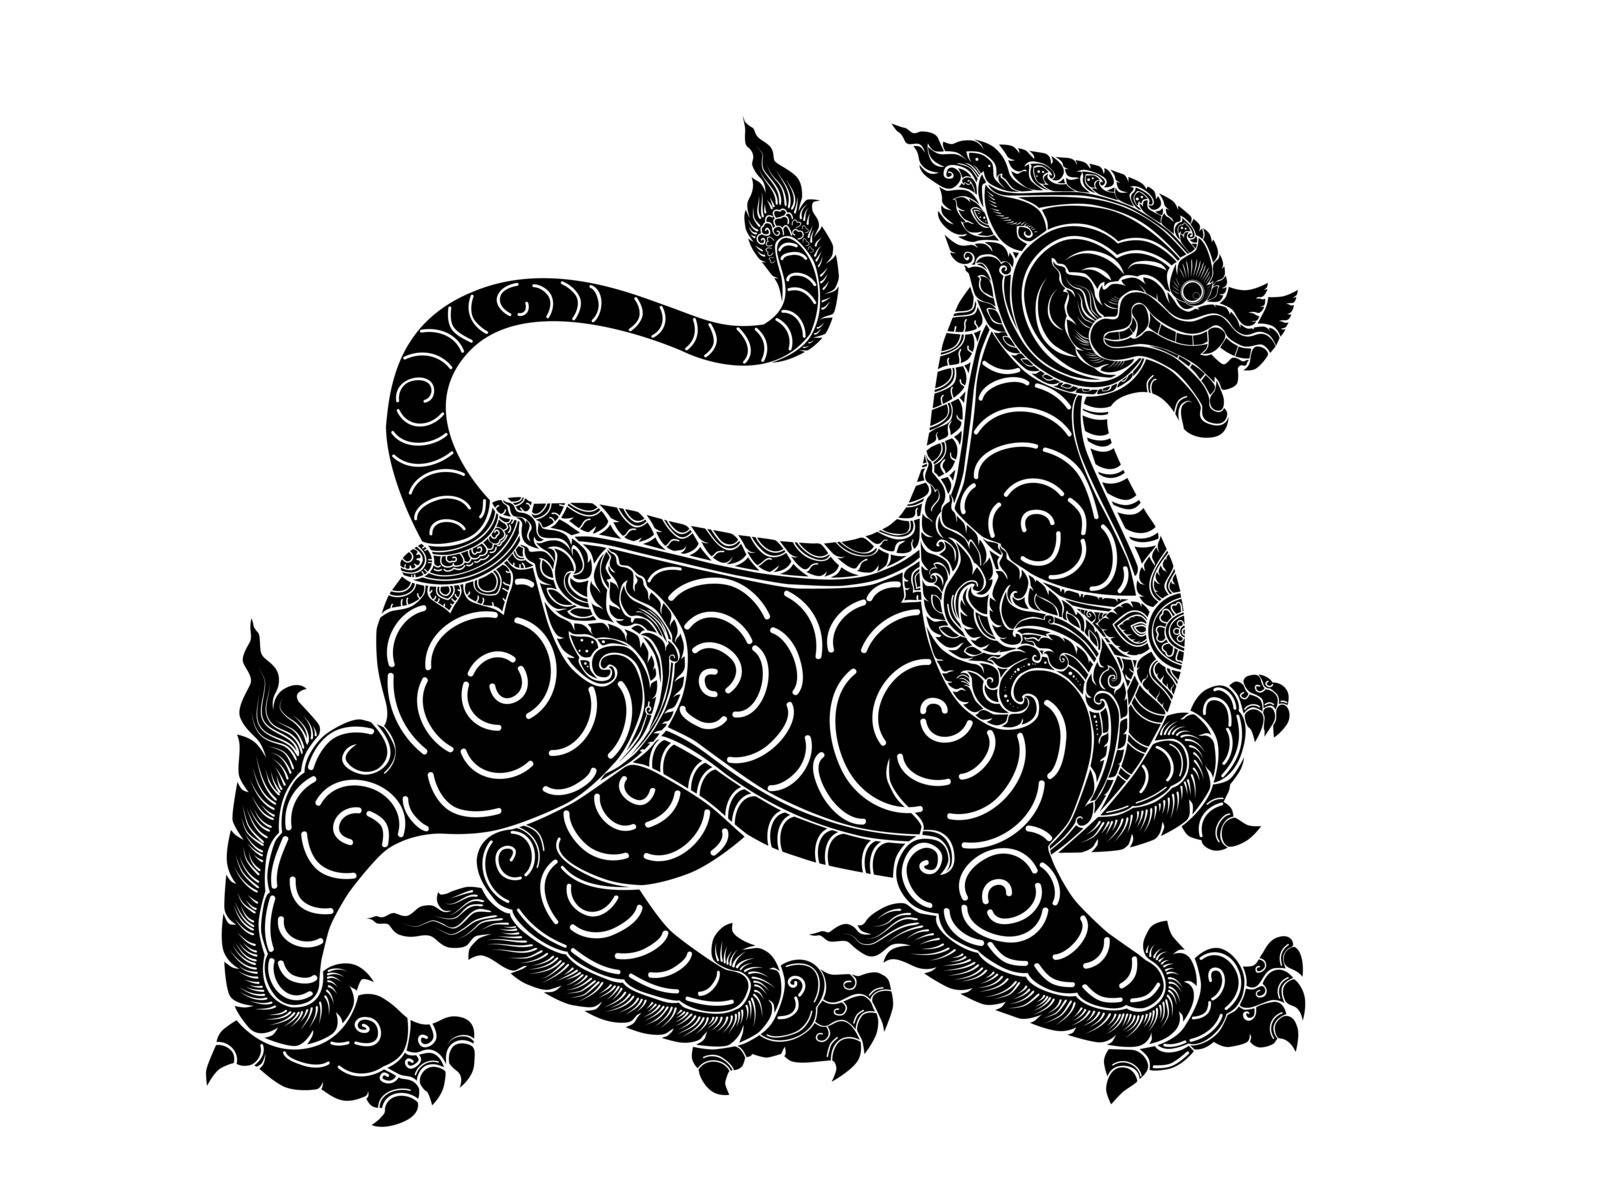 Vector and illustration black silhouette of leo or lion Thai style